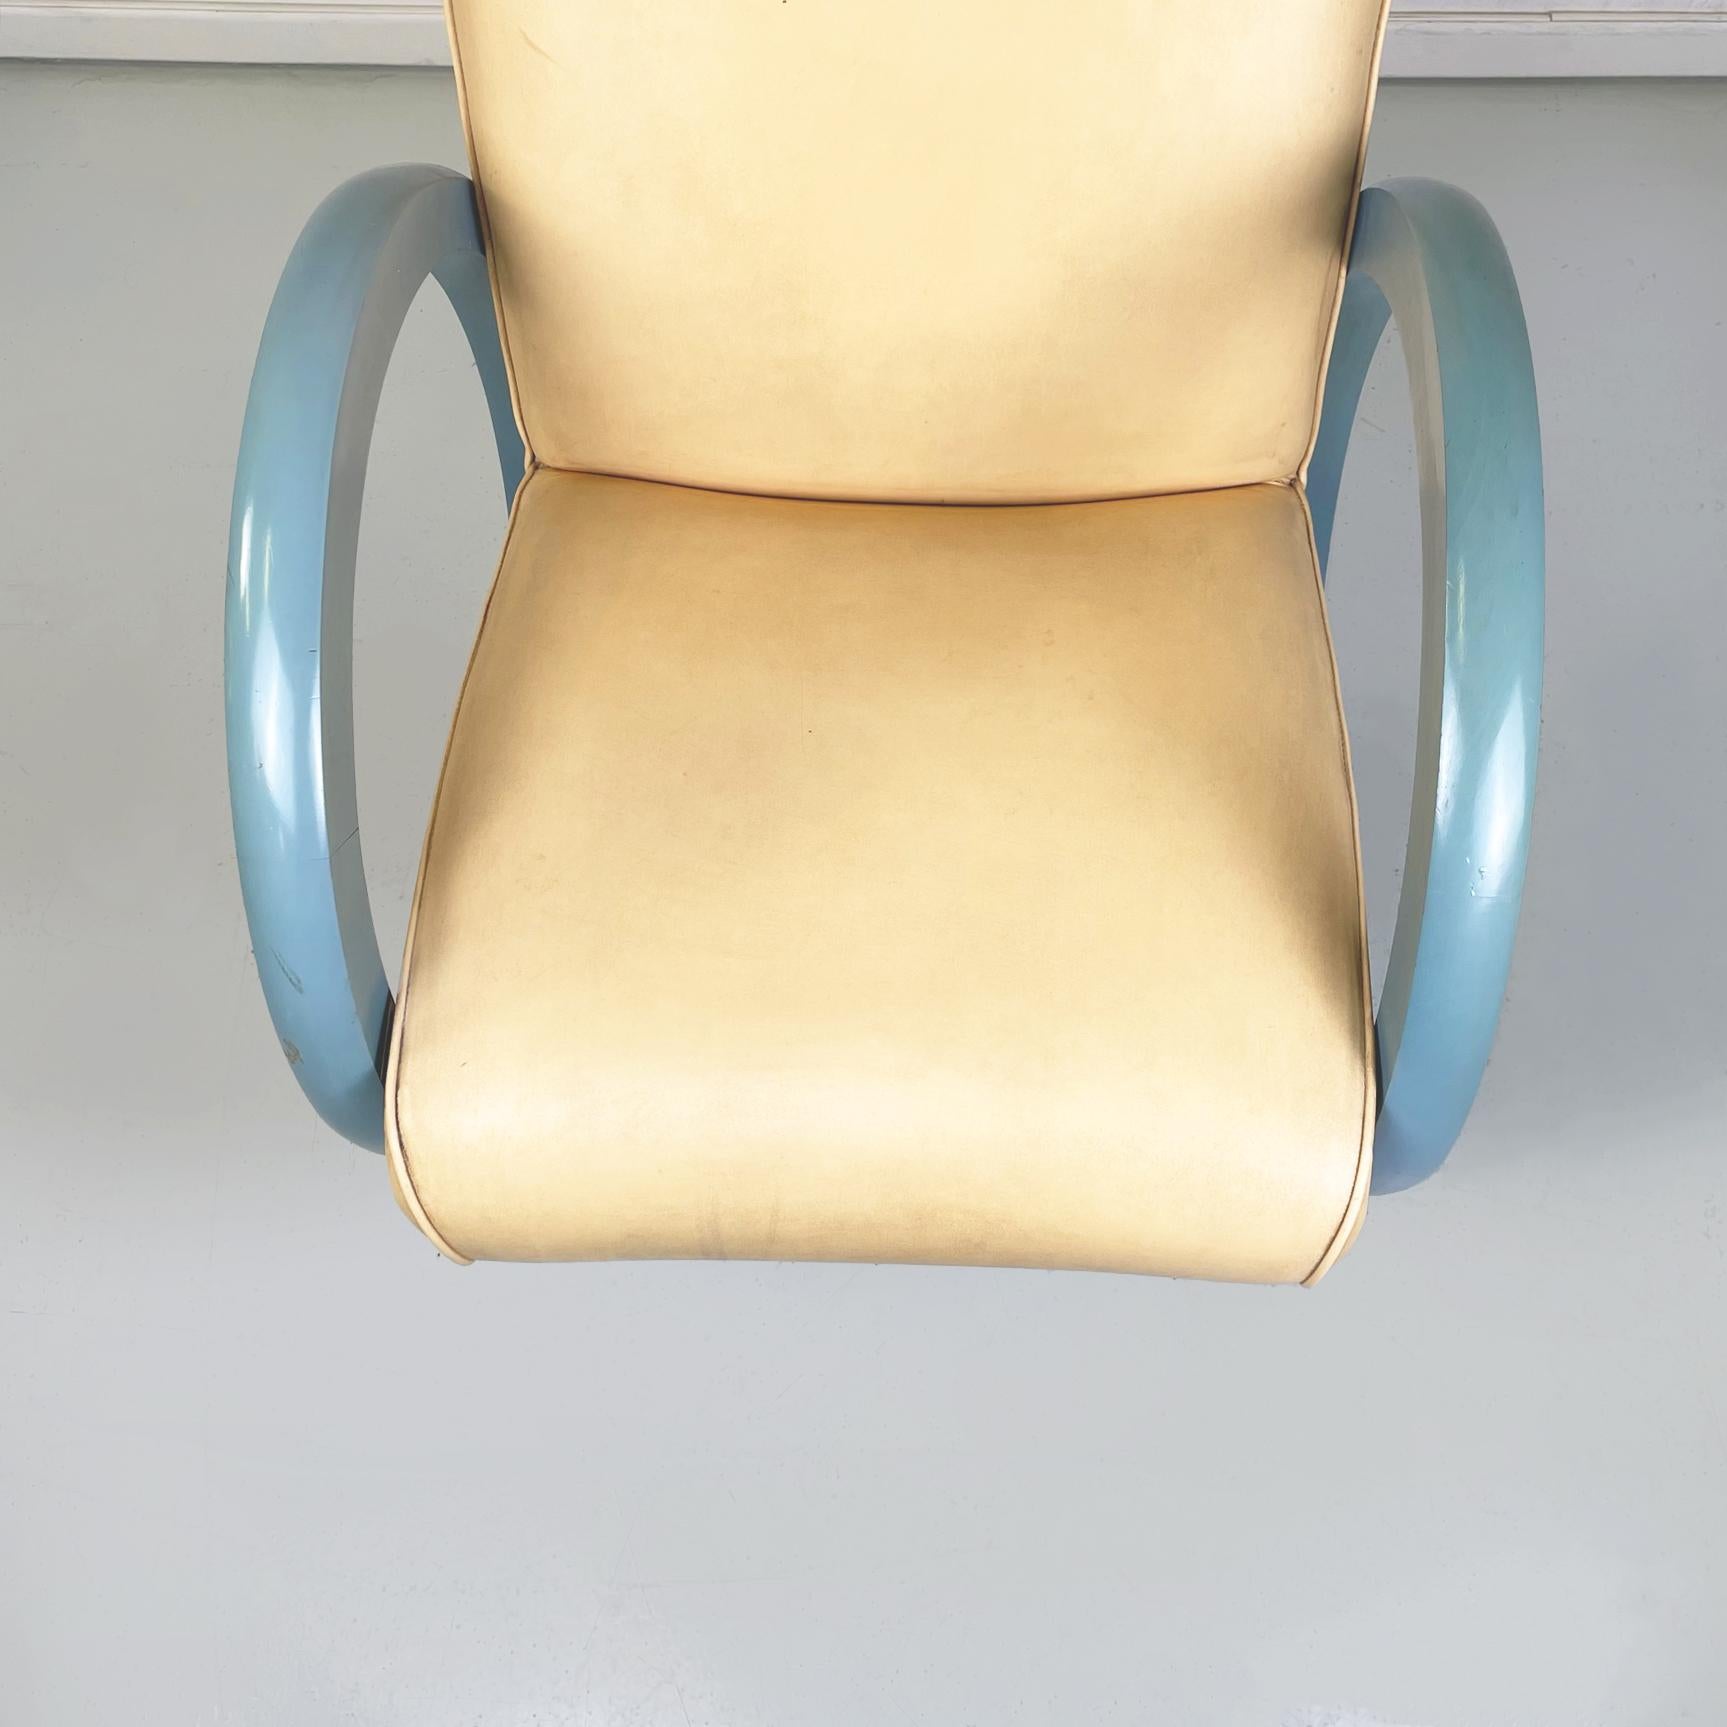 Italian Modern Armchair in Beige Leather and Light Blue Wood, 1980s For Sale 4